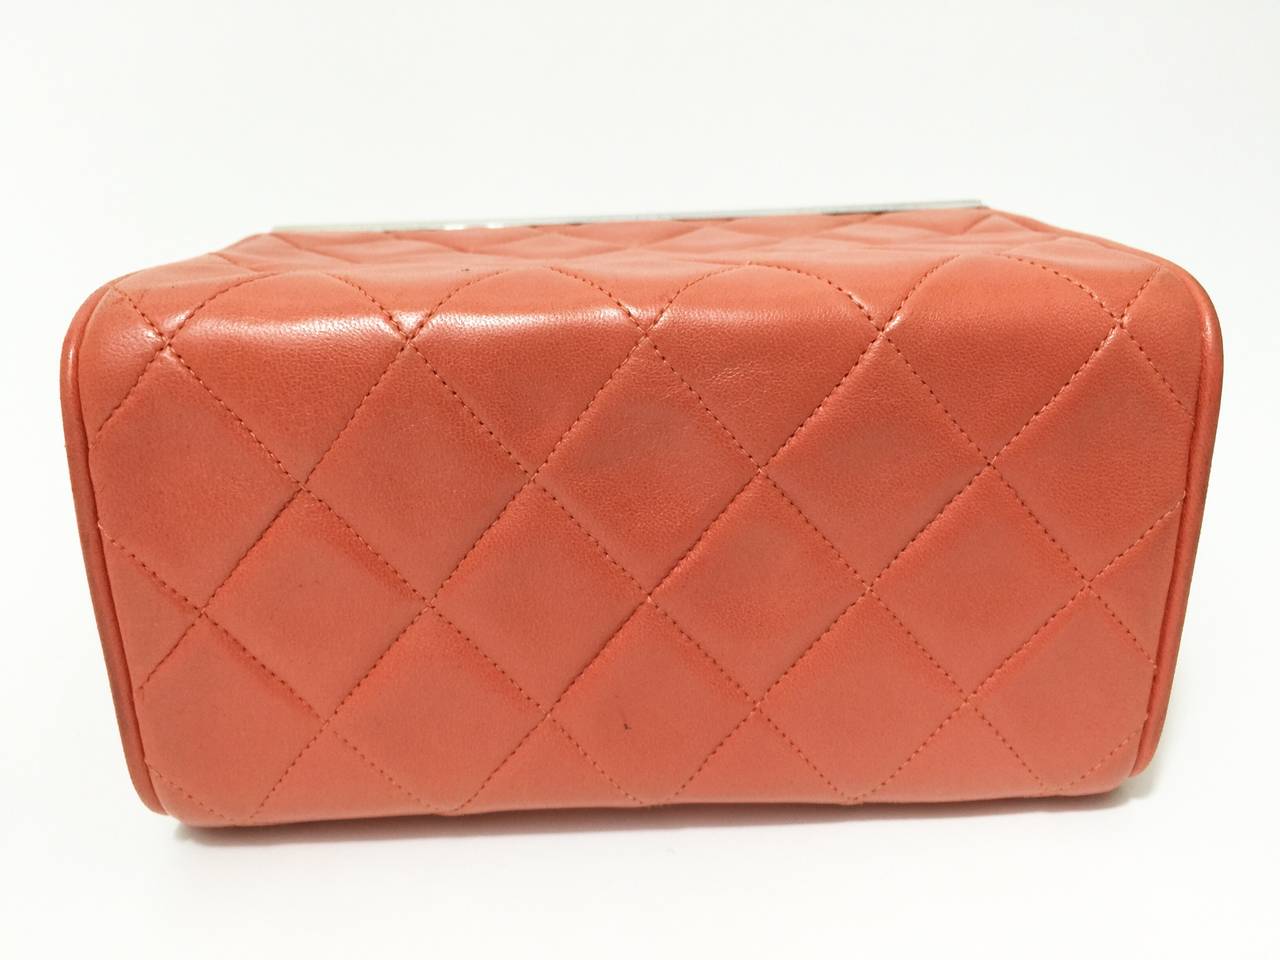 Vintage Chanel Quilted Box Bag Rare For Sale at 1stdibs